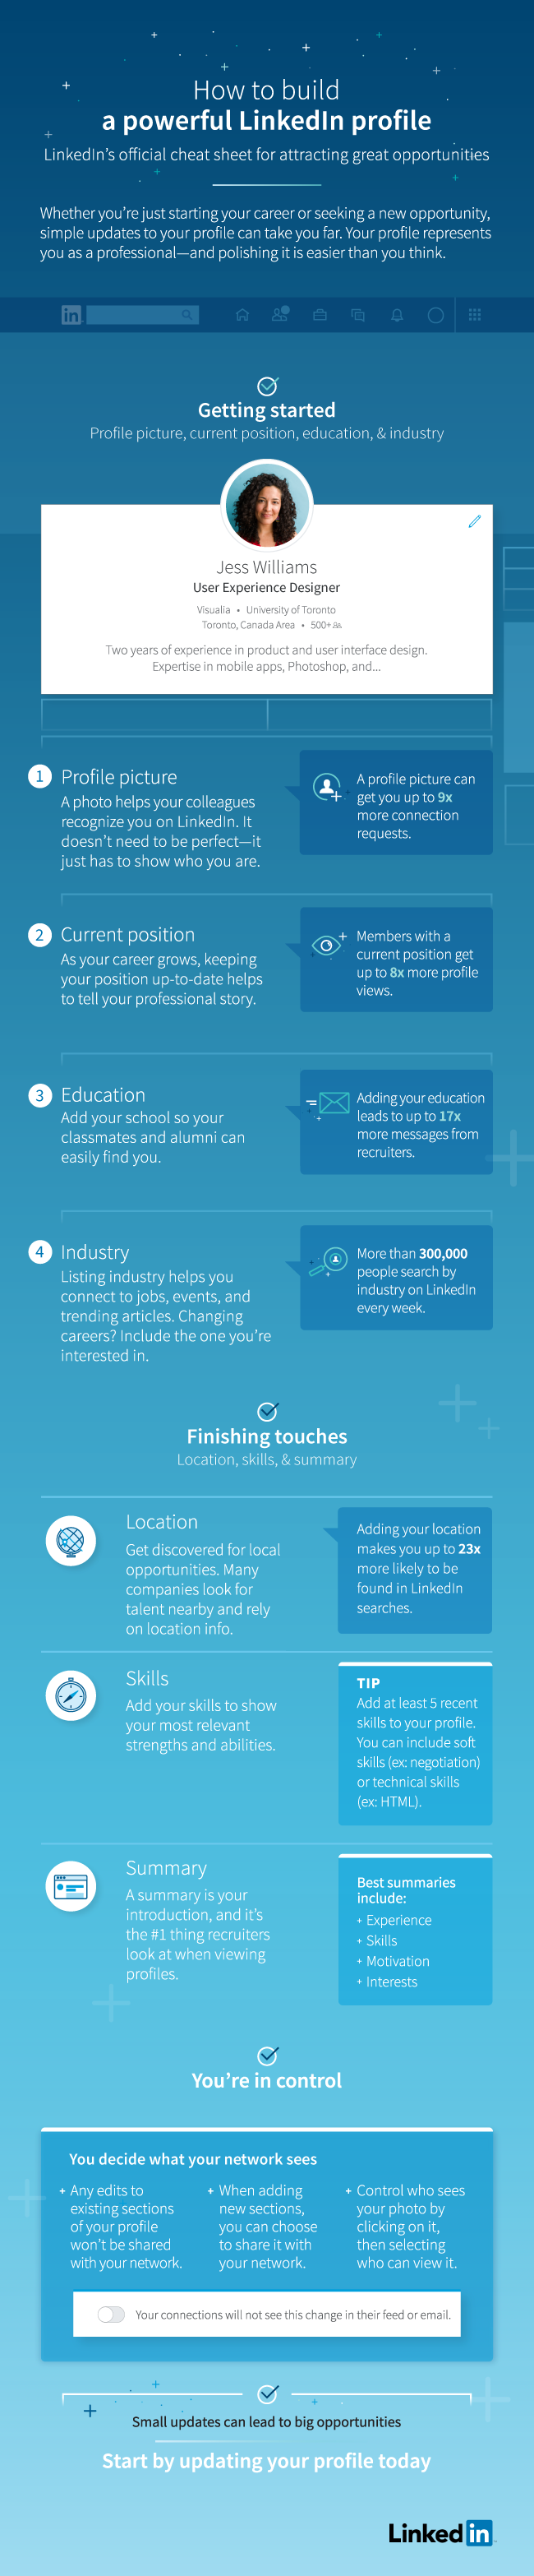 How to Build a Powerful LinkedIn Profile - #Infographic